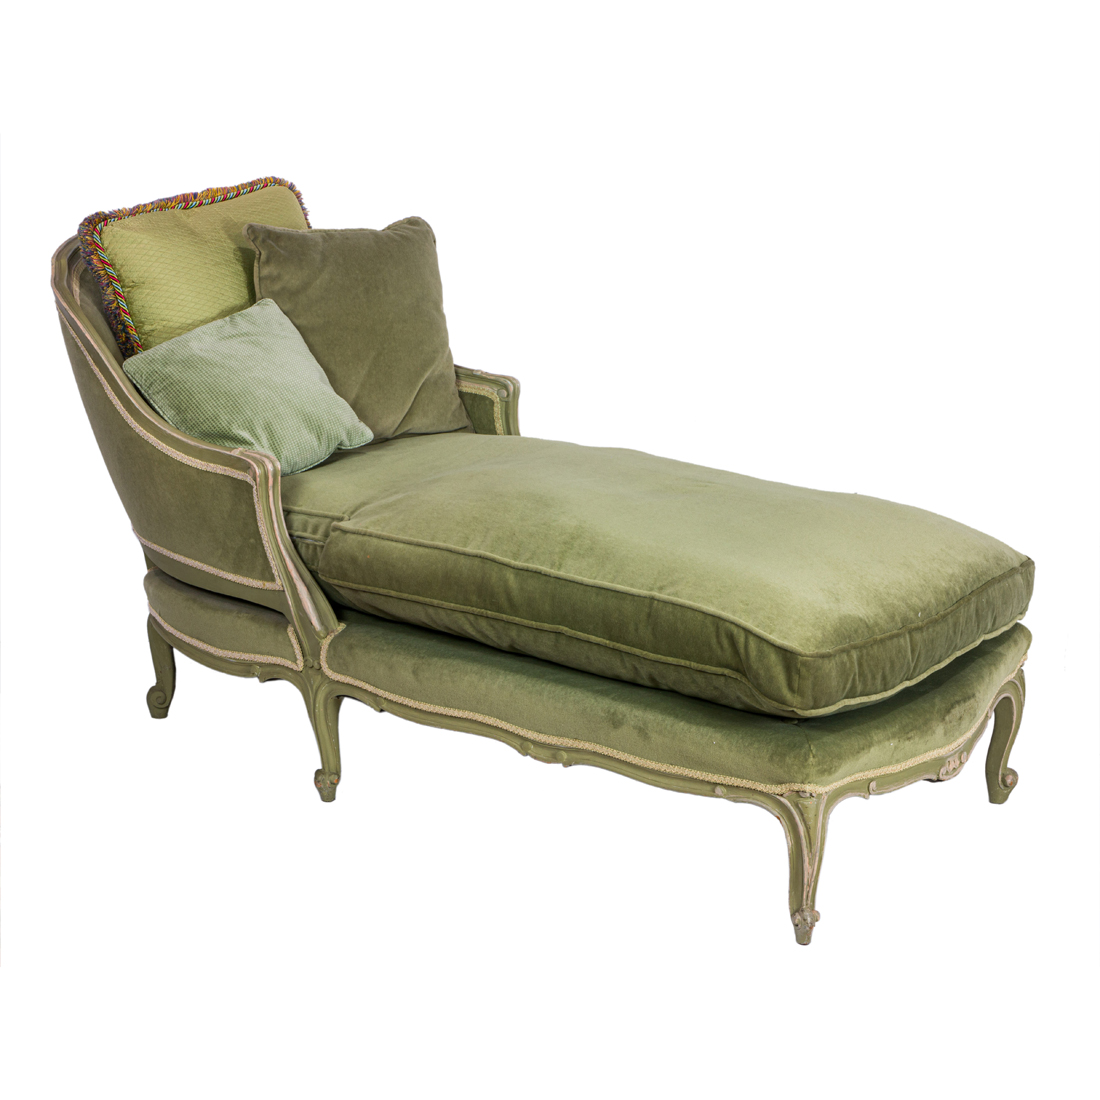 LOUIS XV STYLE PAINTED WOOD CHAISE